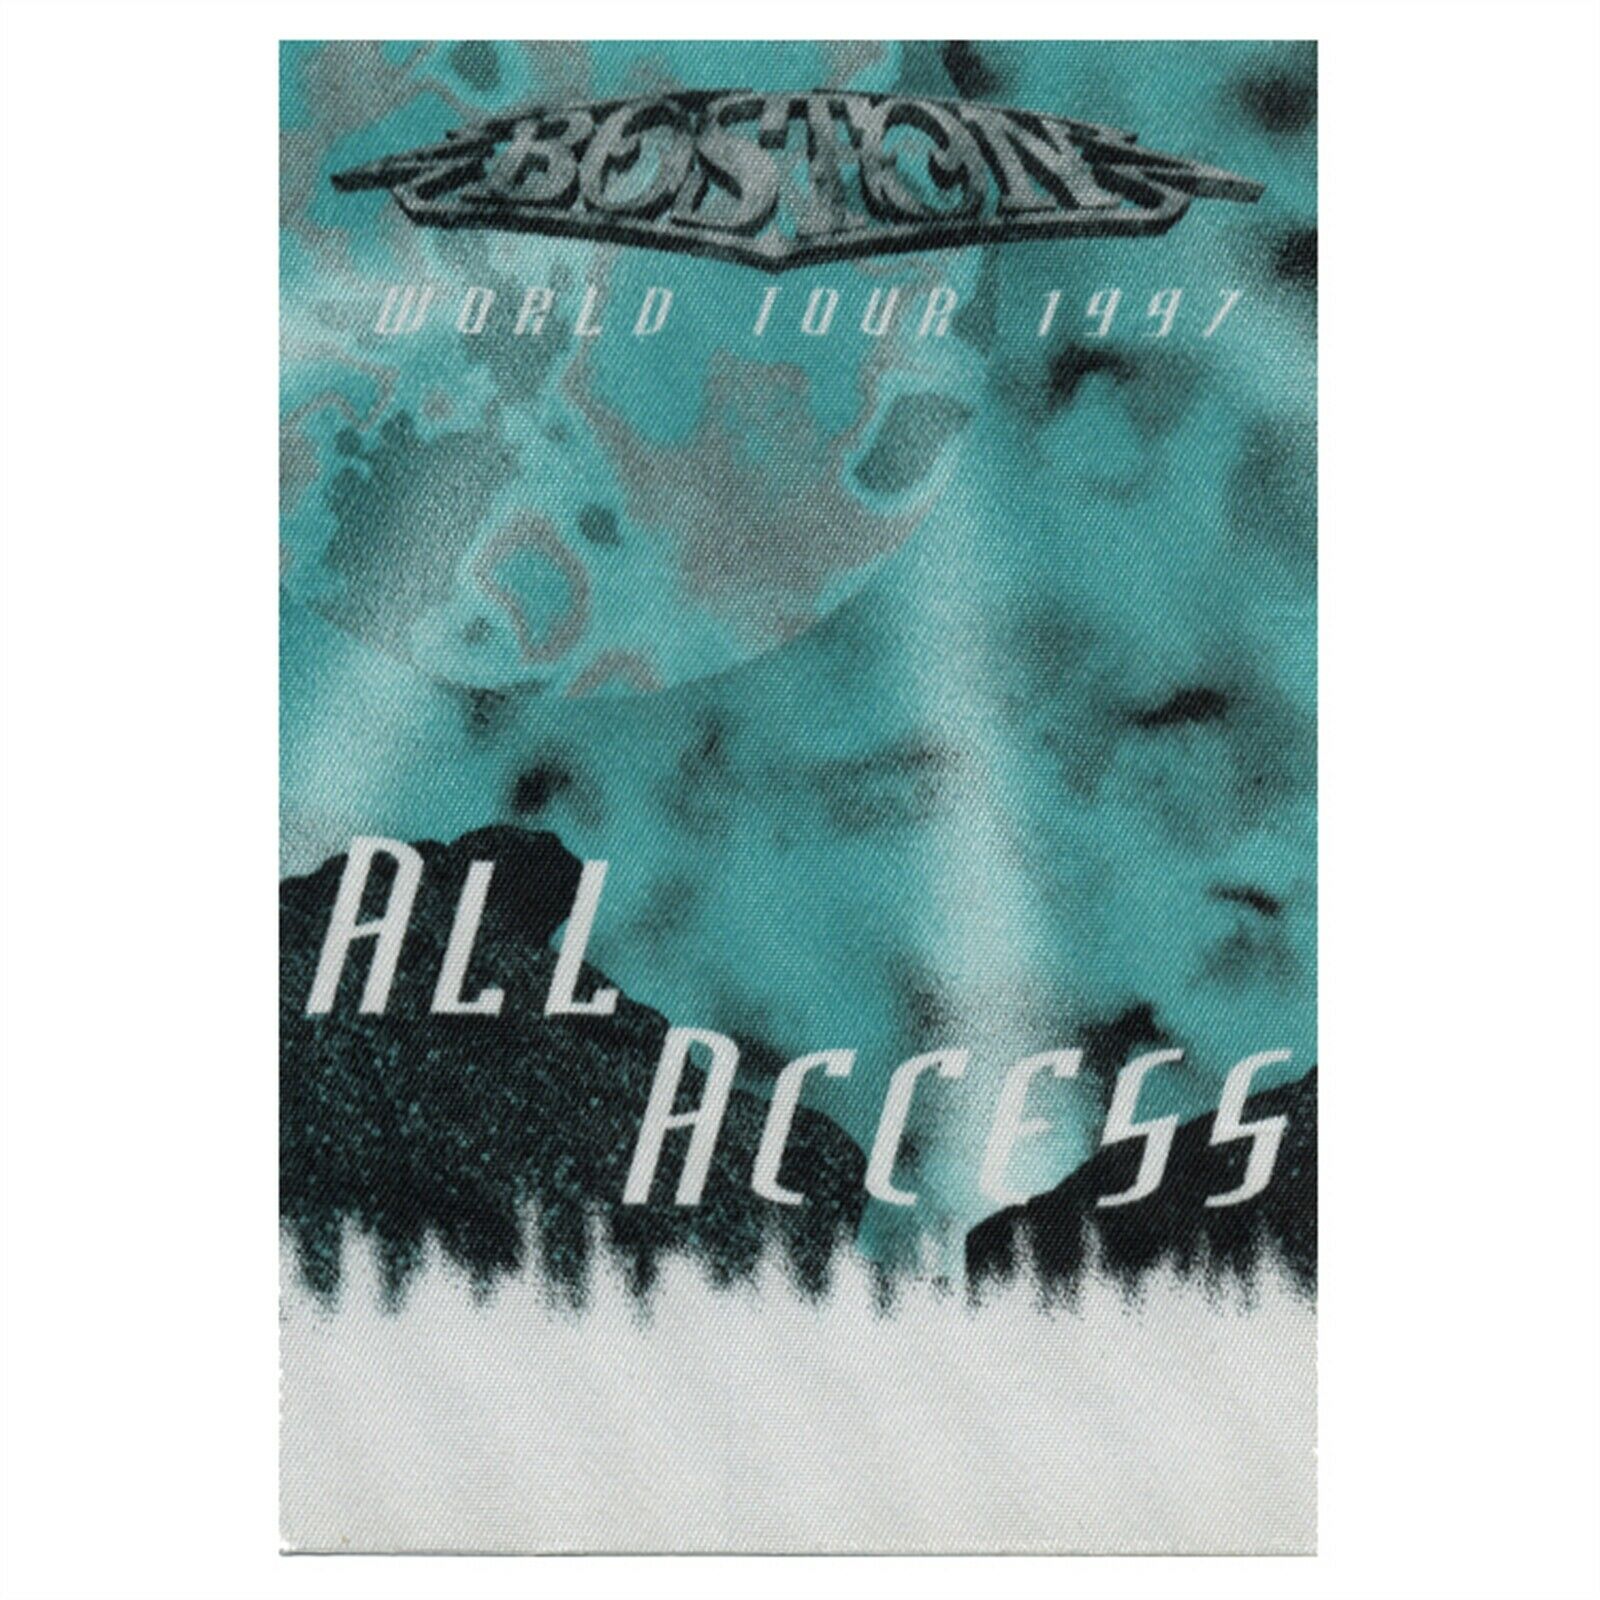 Boston 1997 Greatest Hits Concert Tour Backstage Pass